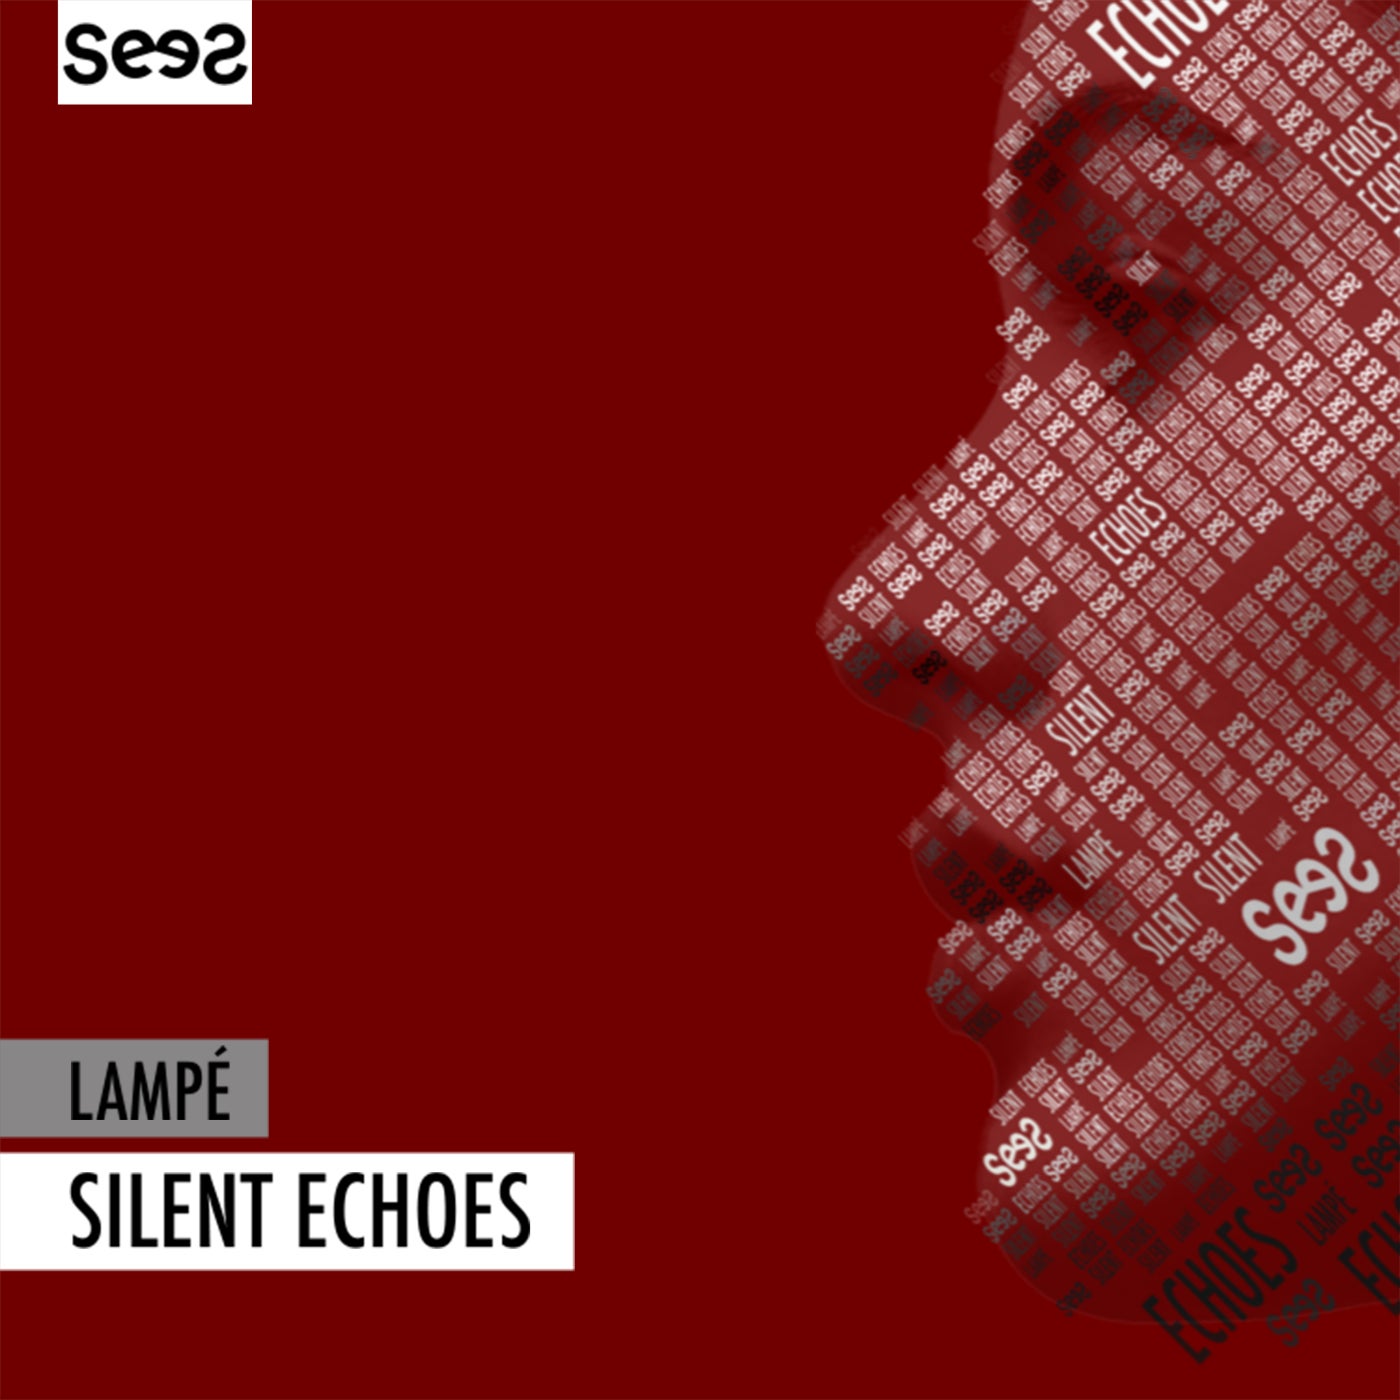 image cover: Lampe - Silent Echoes on SeeS